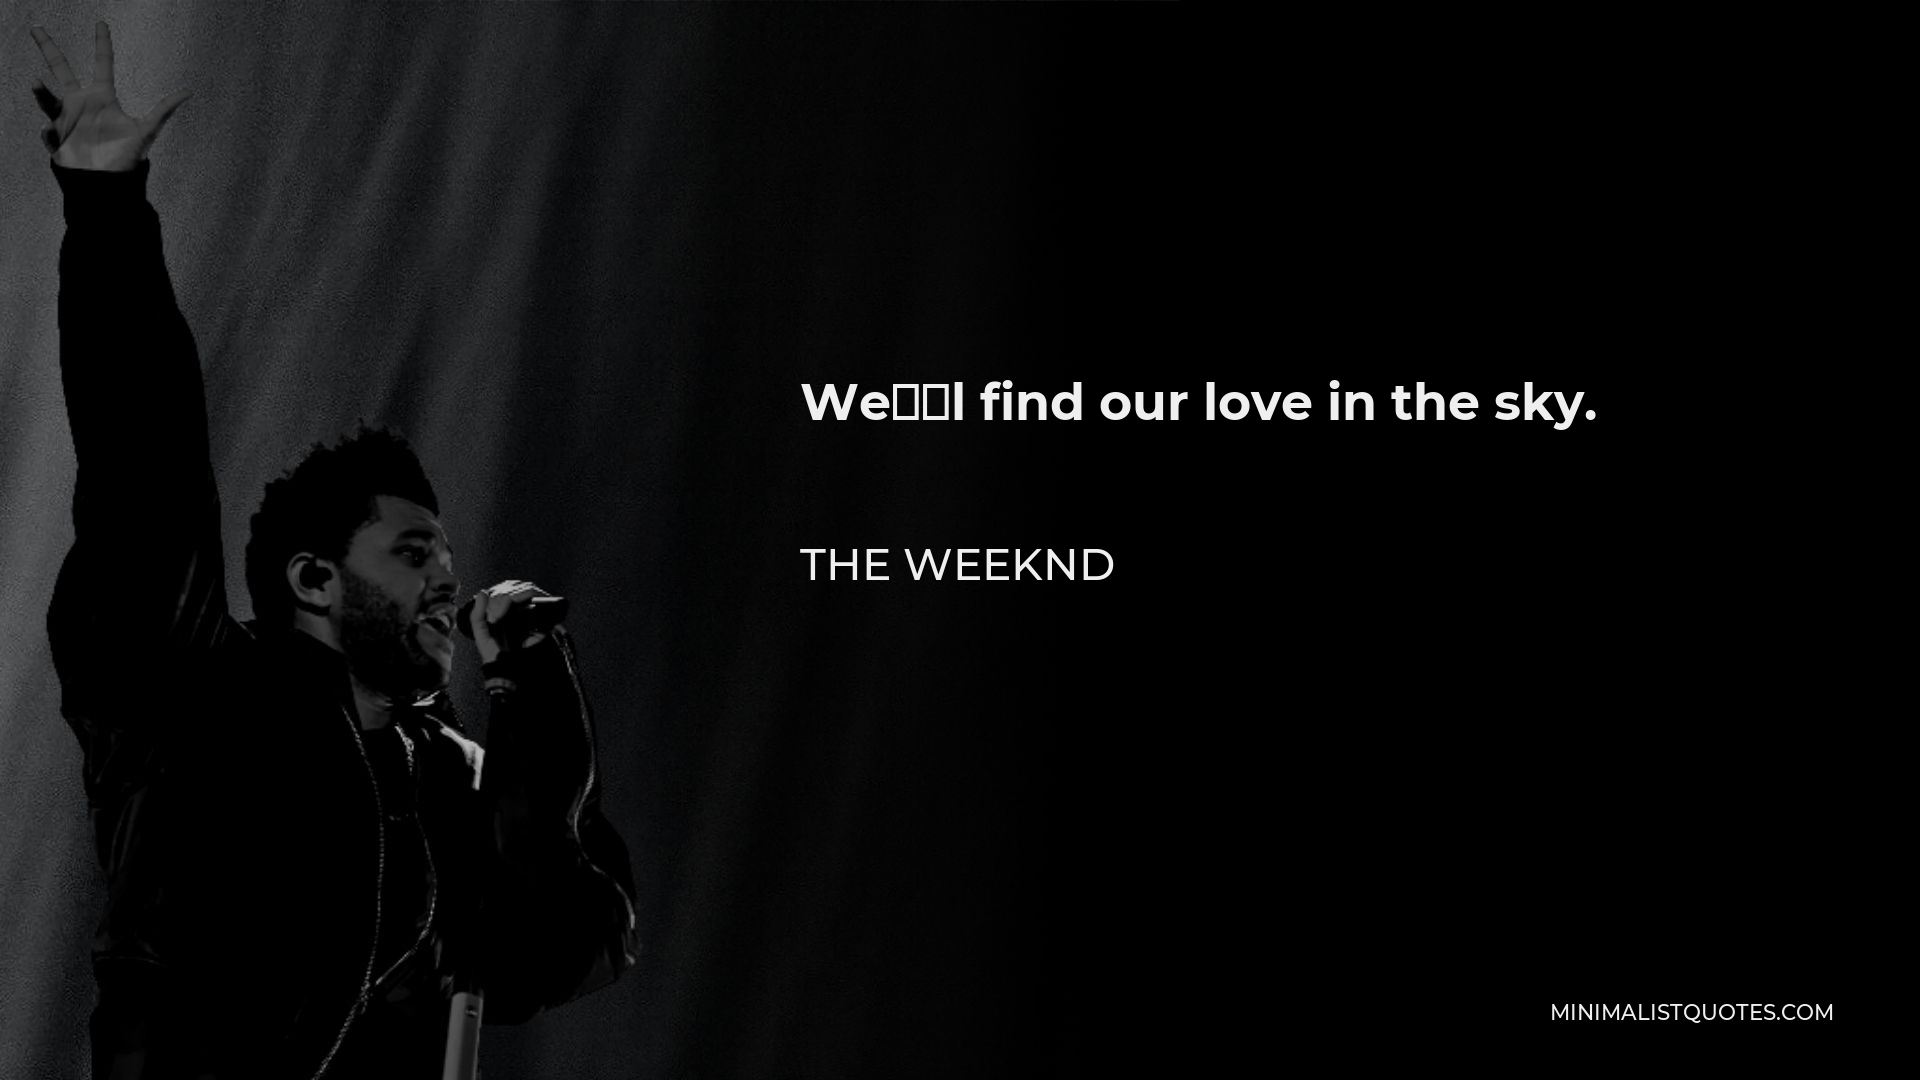 The Weeknd Quote - We’ll find our love in the sky.